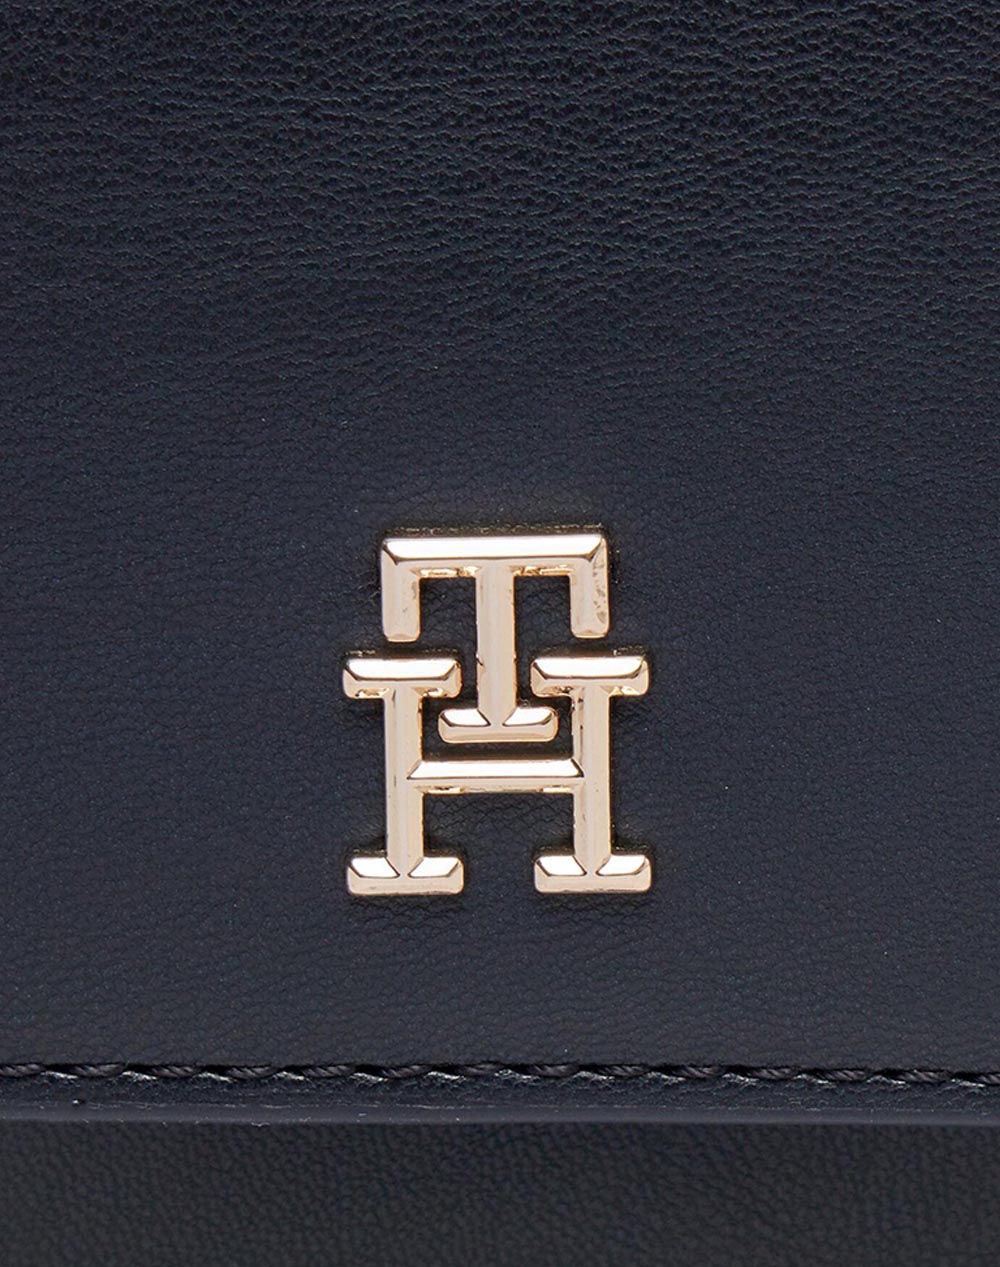 TOMMY HILFIGER TH REFINED MED CROSSOVER (Rozměry: 23 x 15 x 9 cm.)